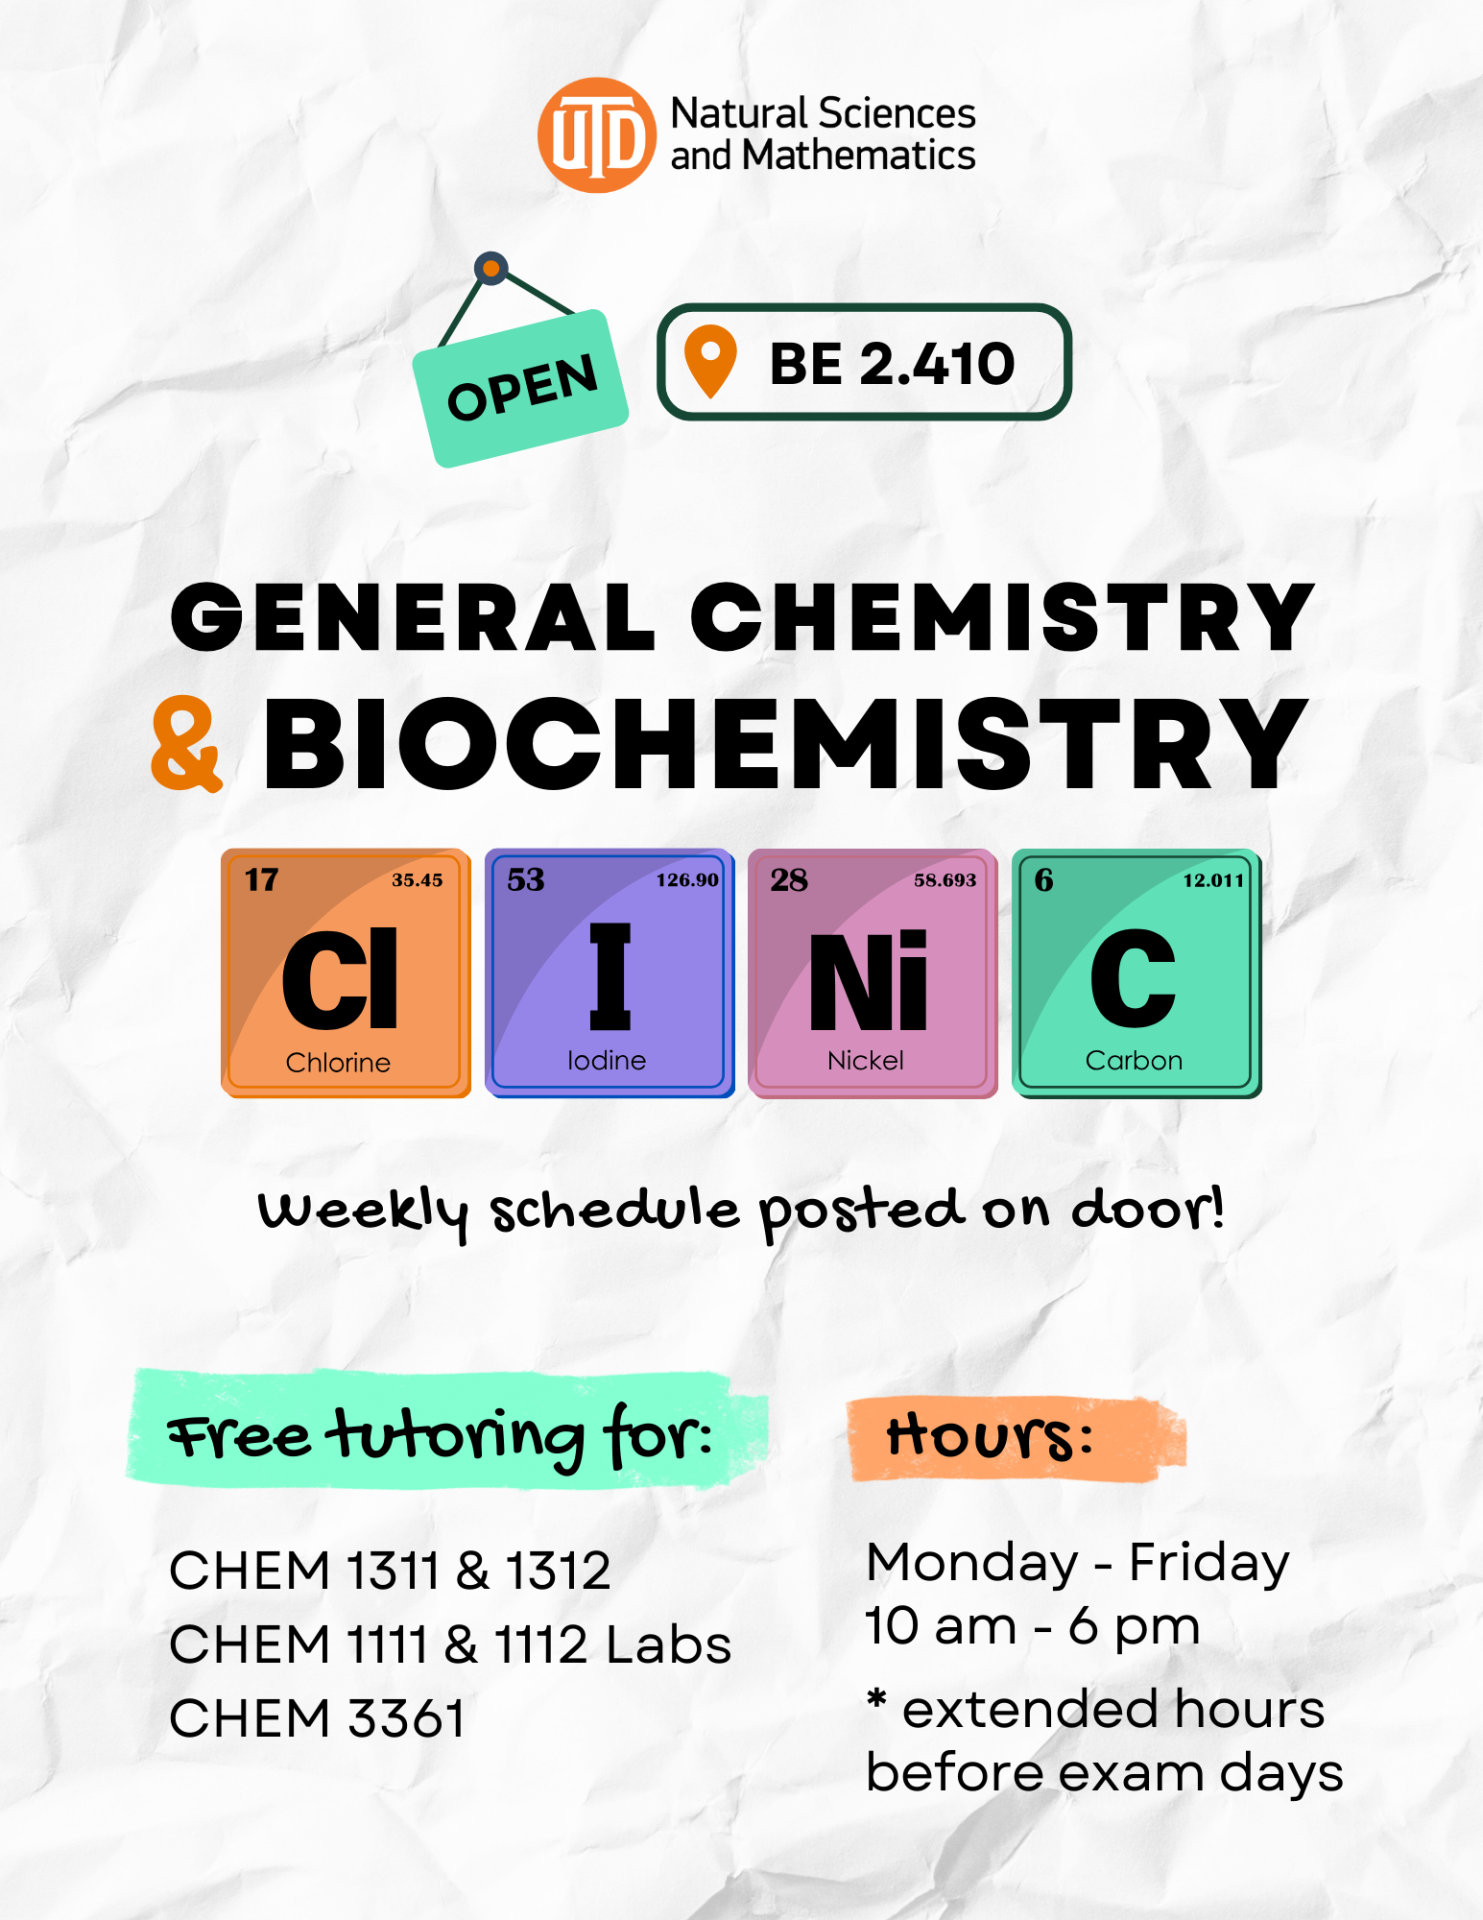 Chemistry and Biochemistry Clinic:  Free Tutoring for General Chemistry (lecture and Labs) and Biochemistry (CHEM 3361) at BE 2.410, Monday- Friday 10am-6pm.